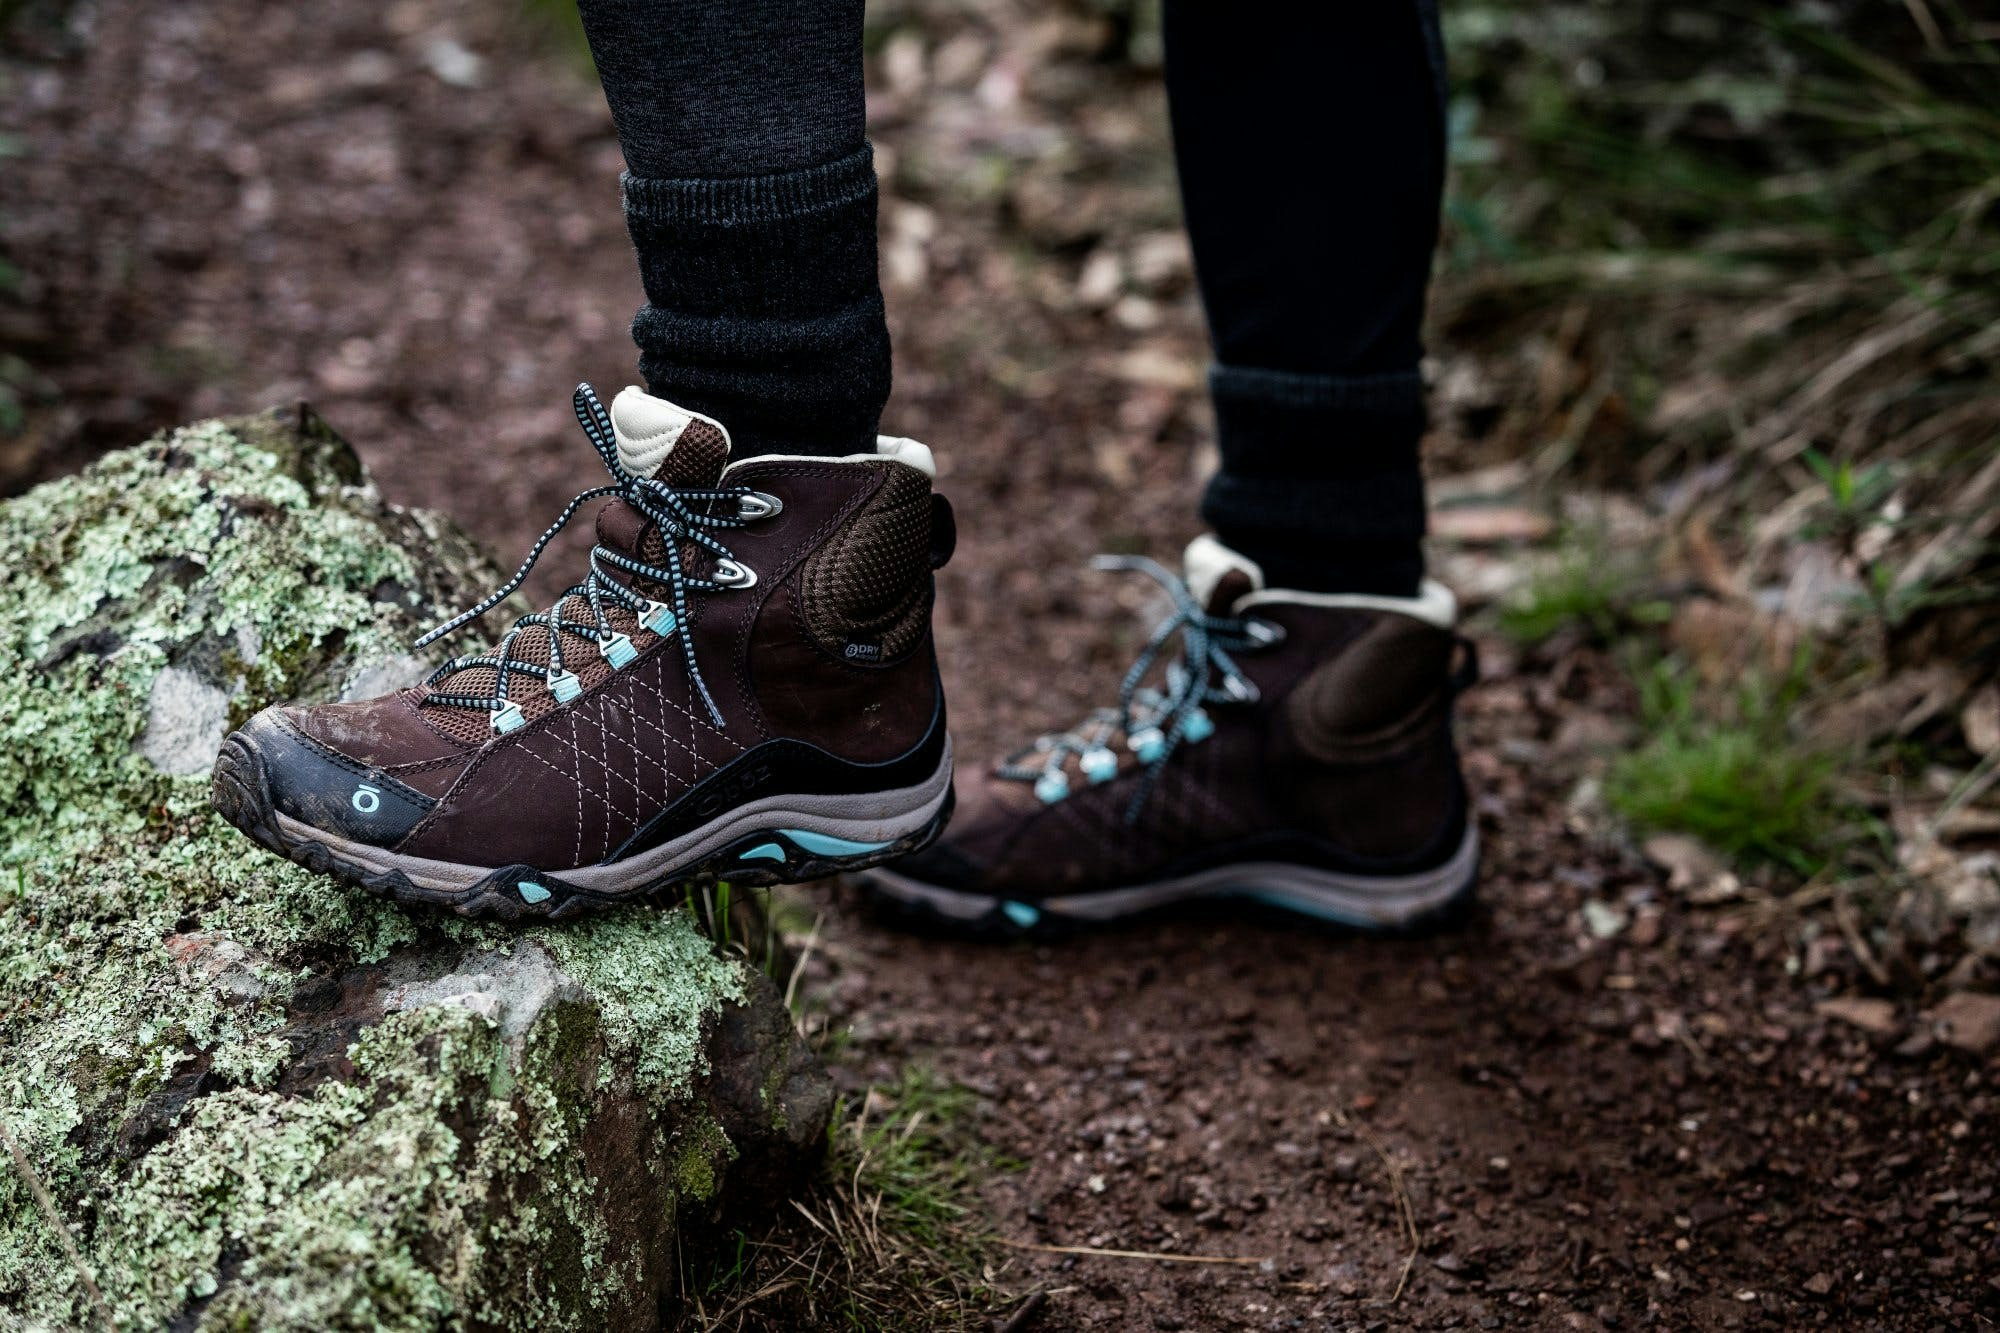 How to choose hiking boots and shoes